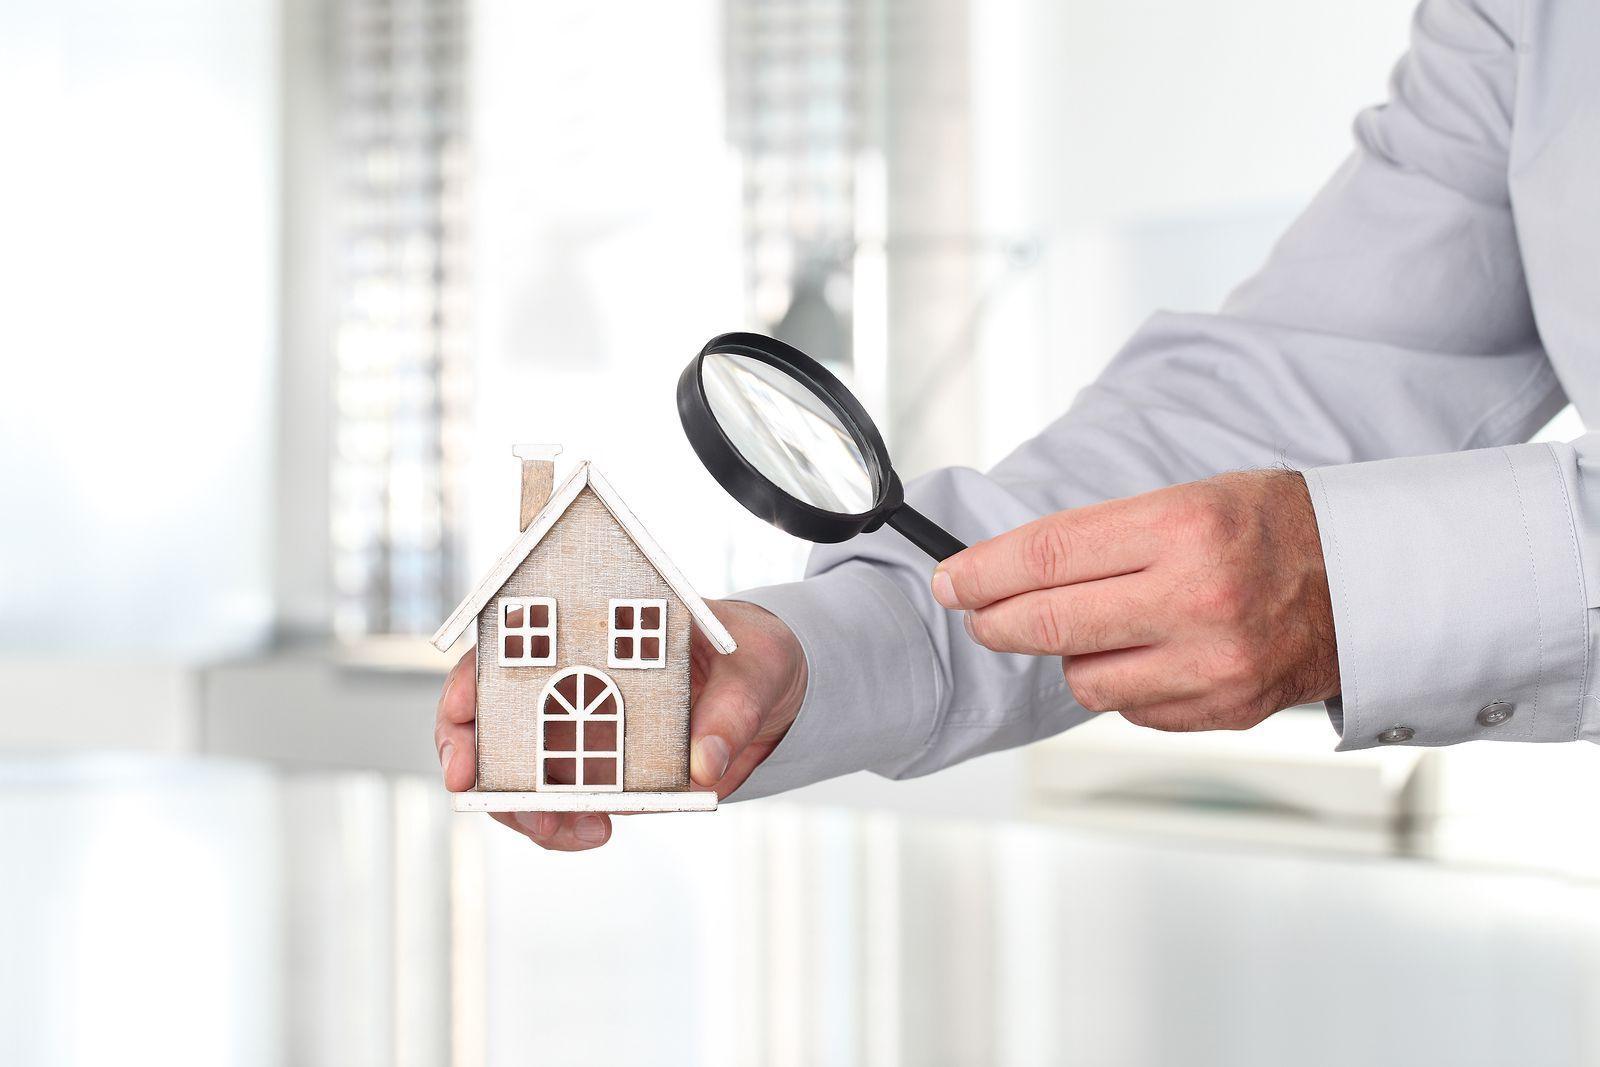 How to find real estate property owner